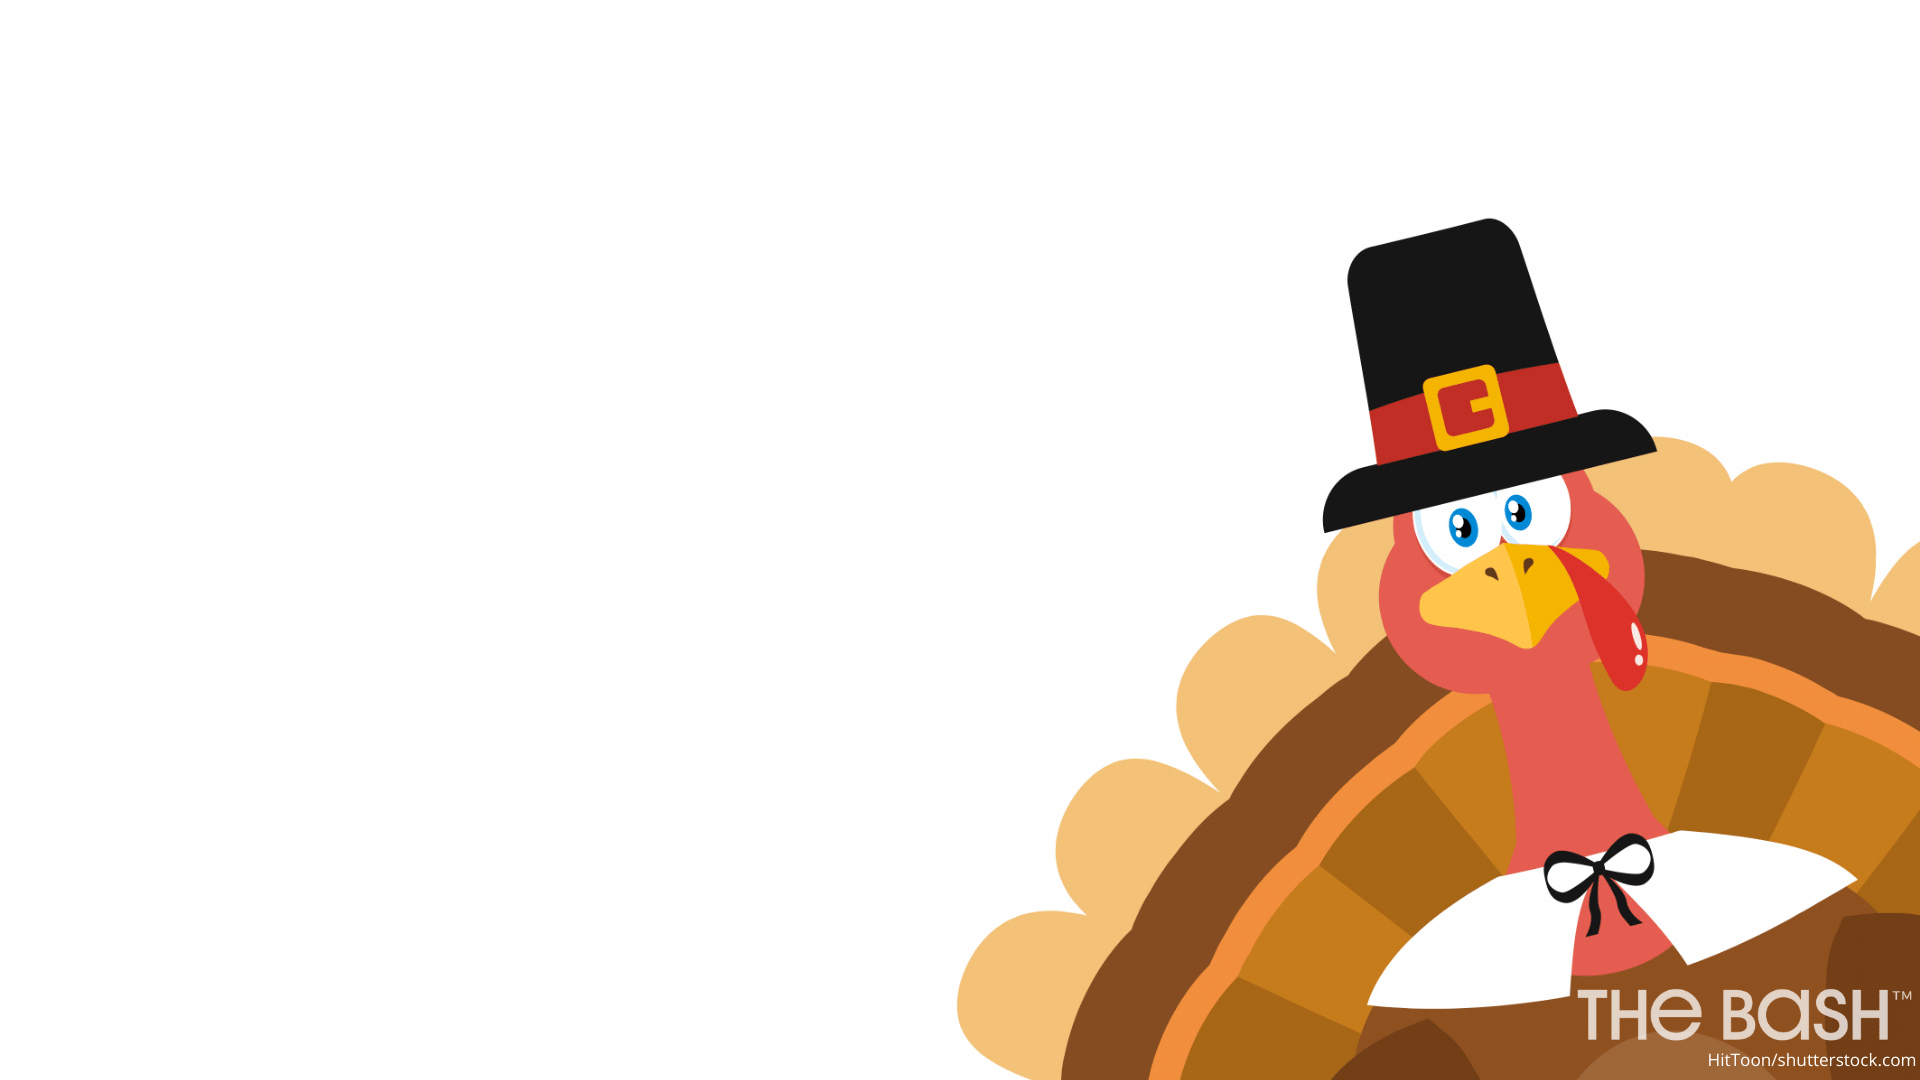 Autumnal Zoom Background for Thanksgiving